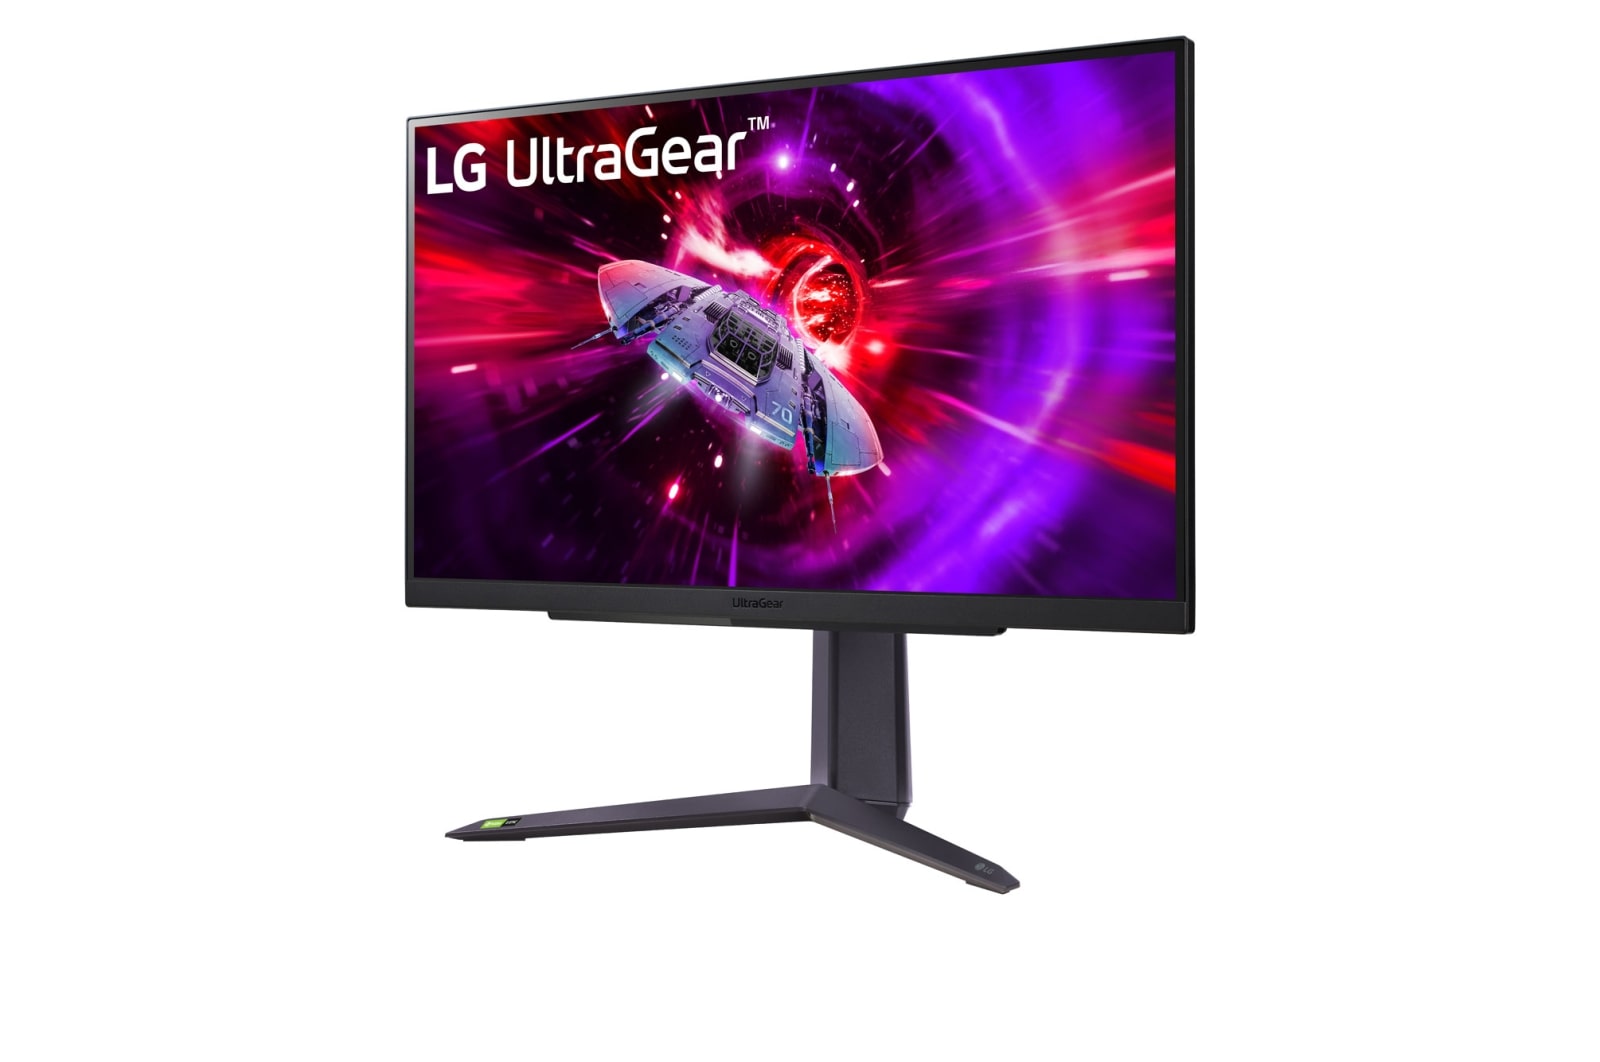 LG Ultragear QHD 165HZ Gaming Monitor right view Front Right view